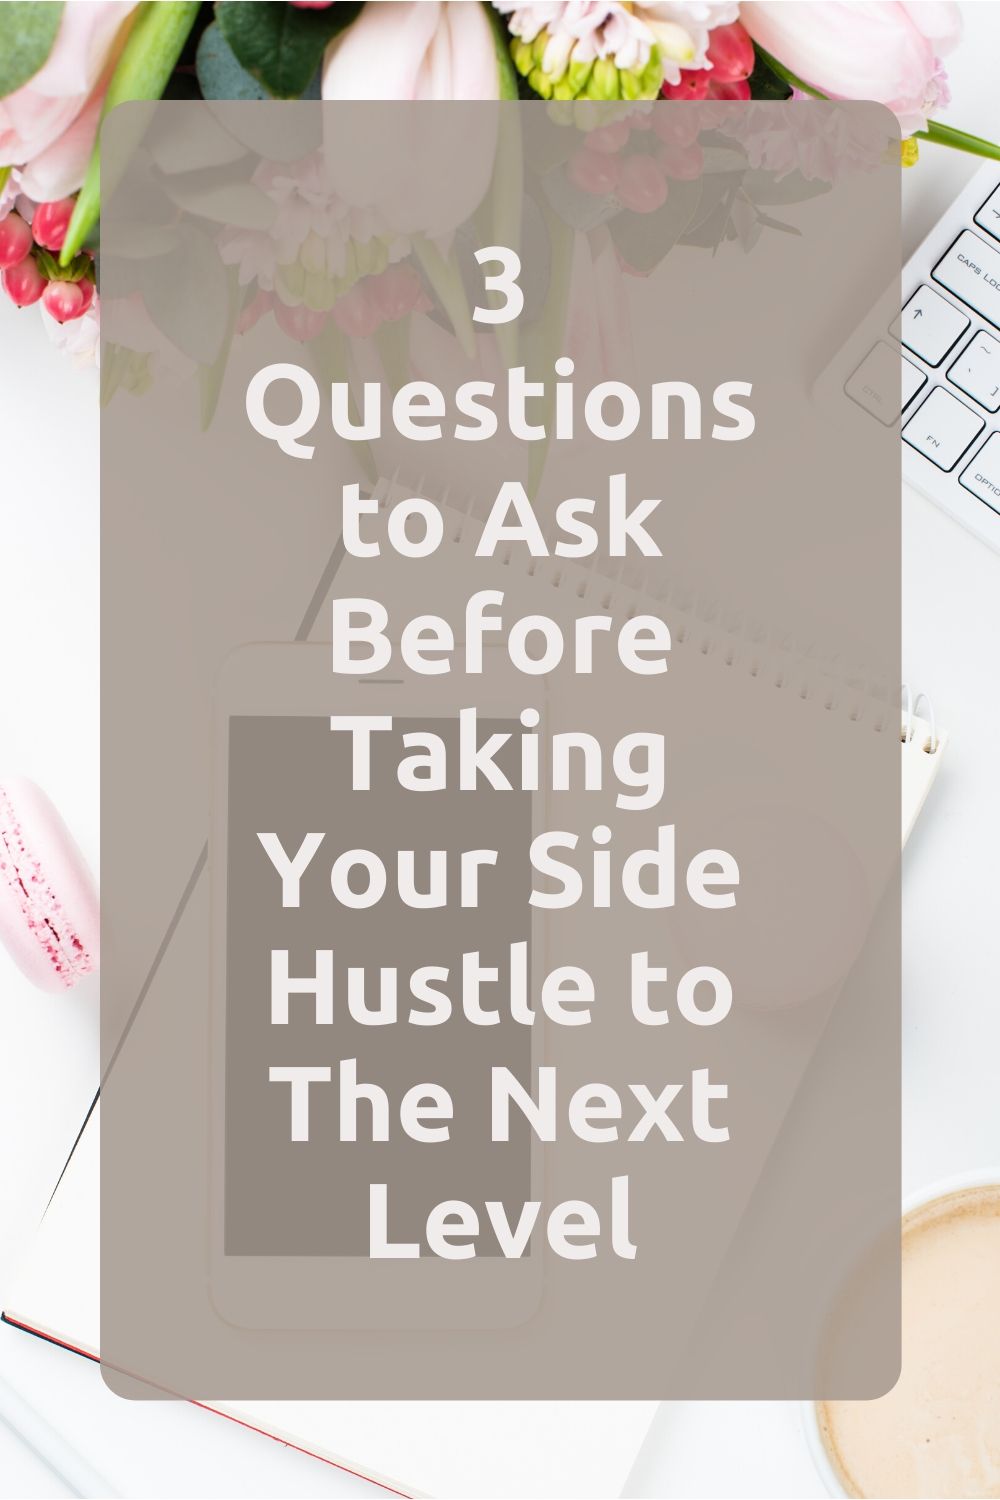 3 Questions to Ask Before Taking Your Side Hustle to the Next Level